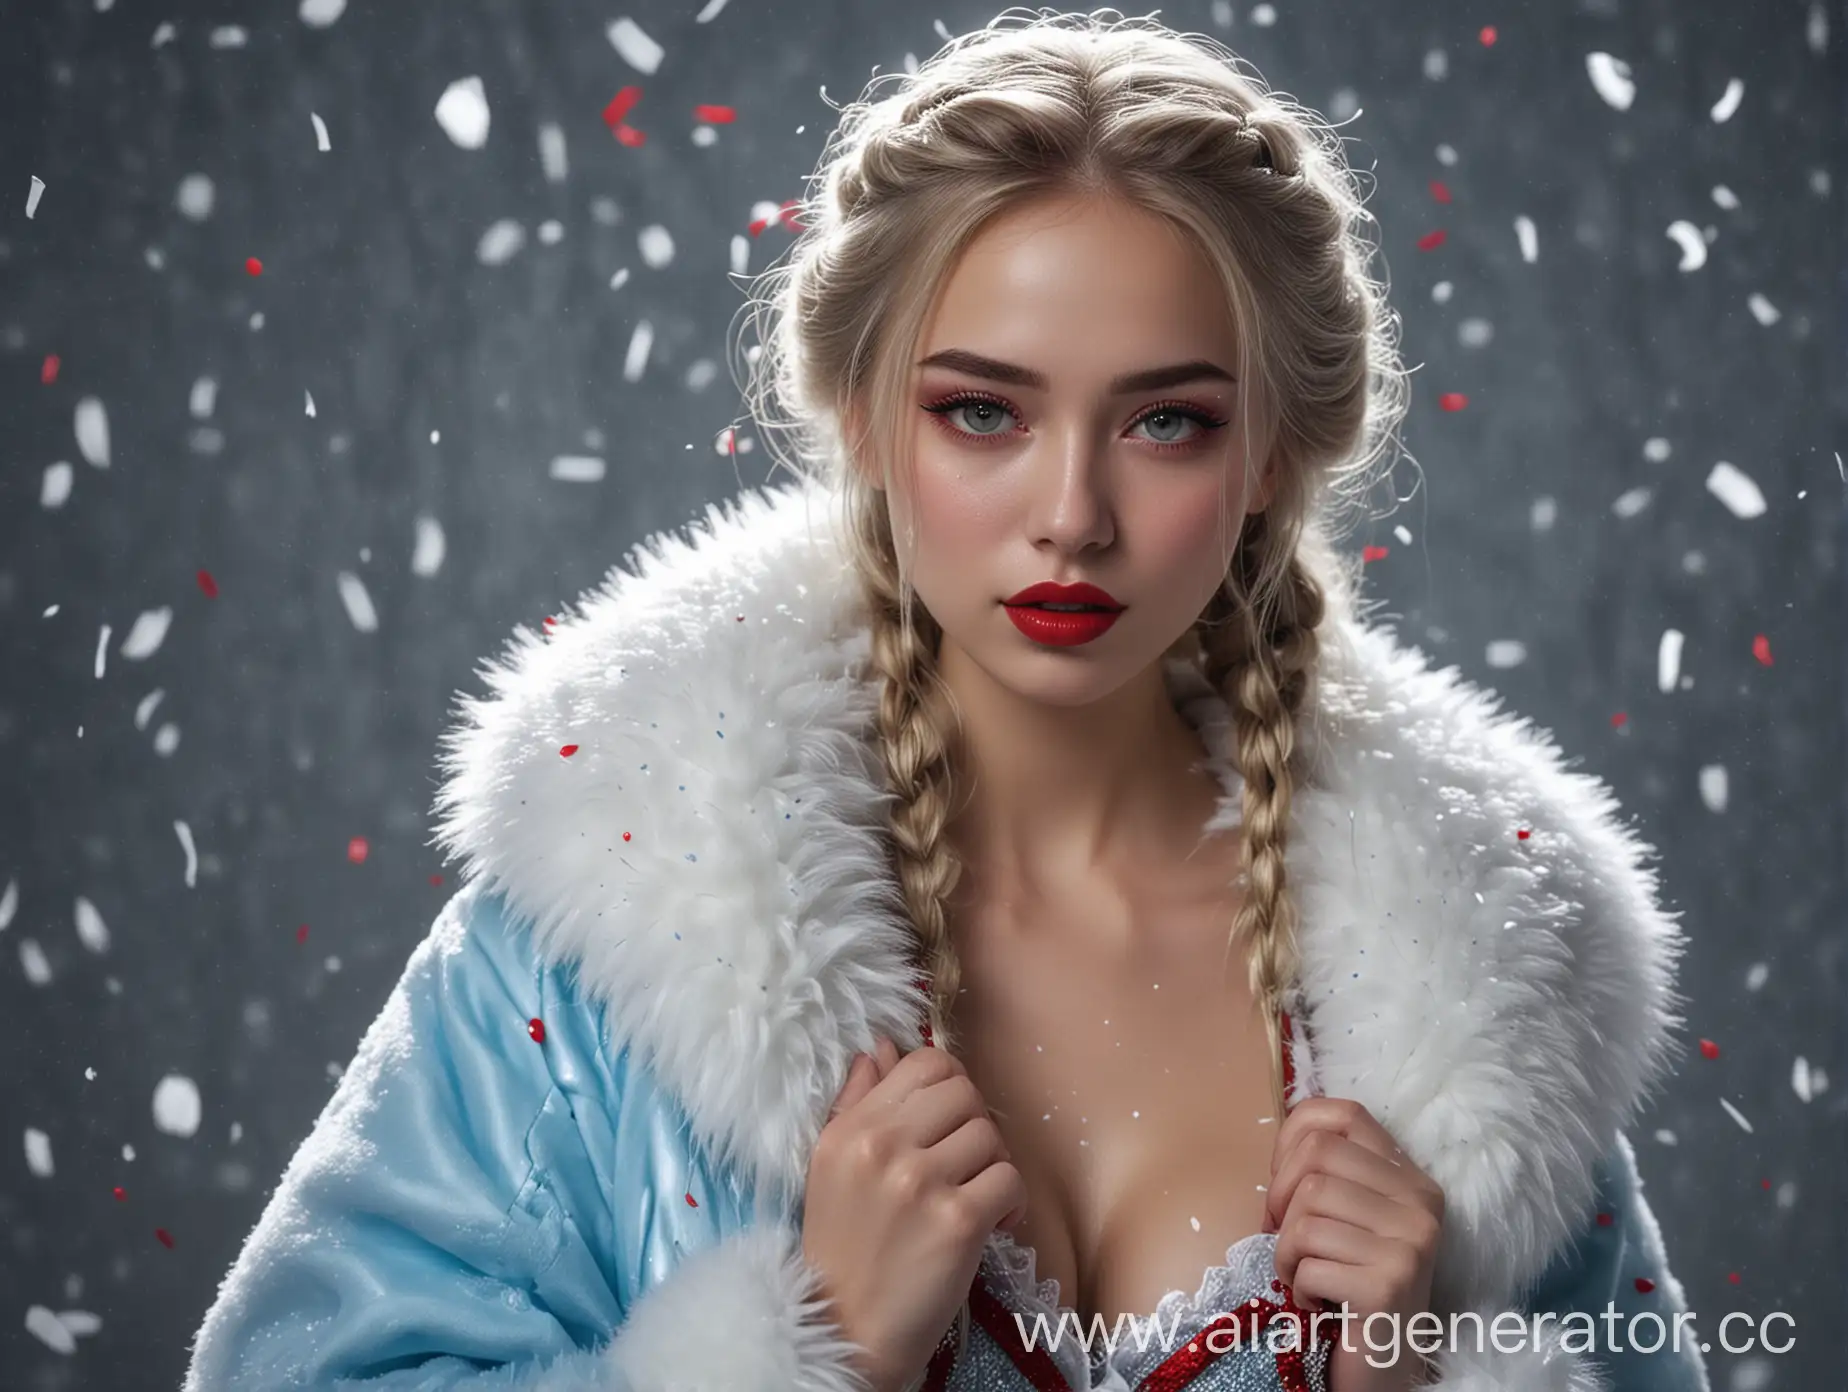 Russian-Snow-Maiden-Portrait-17YearOld-in-Blue-Fur-Coat-Amidst-Snowflakes-and-Confetti